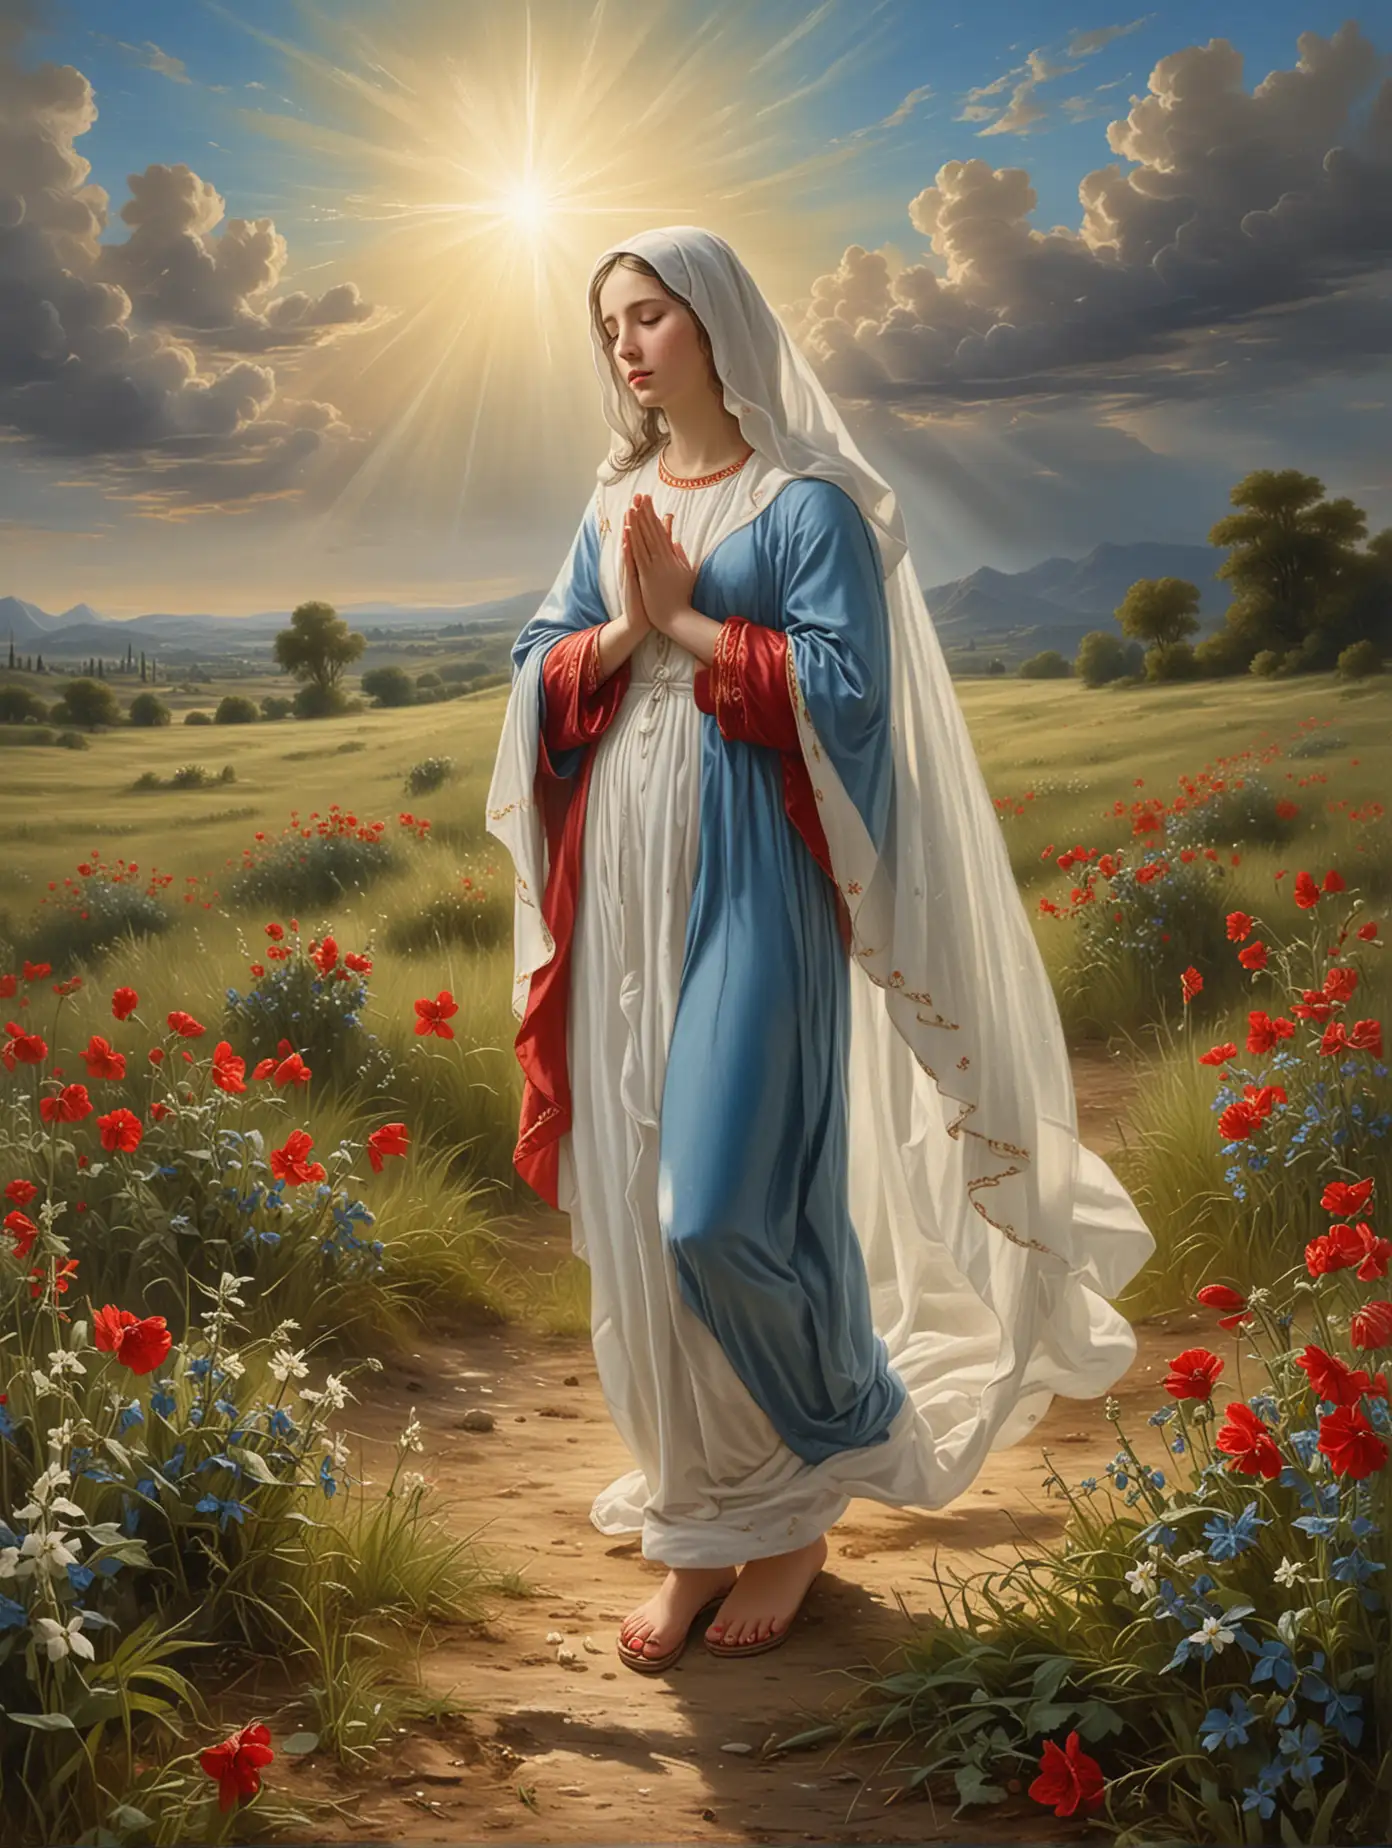 The painting depicts  the very young Holy Mary in profile looking with open eyes to her right praying and wearing sandals. The scene is set in an open field.
The central figure is the Virgin Mary who is  dressed in a loose white veil over a blue cloak over a red dress and sandals. the light is coming in from the sky behind her